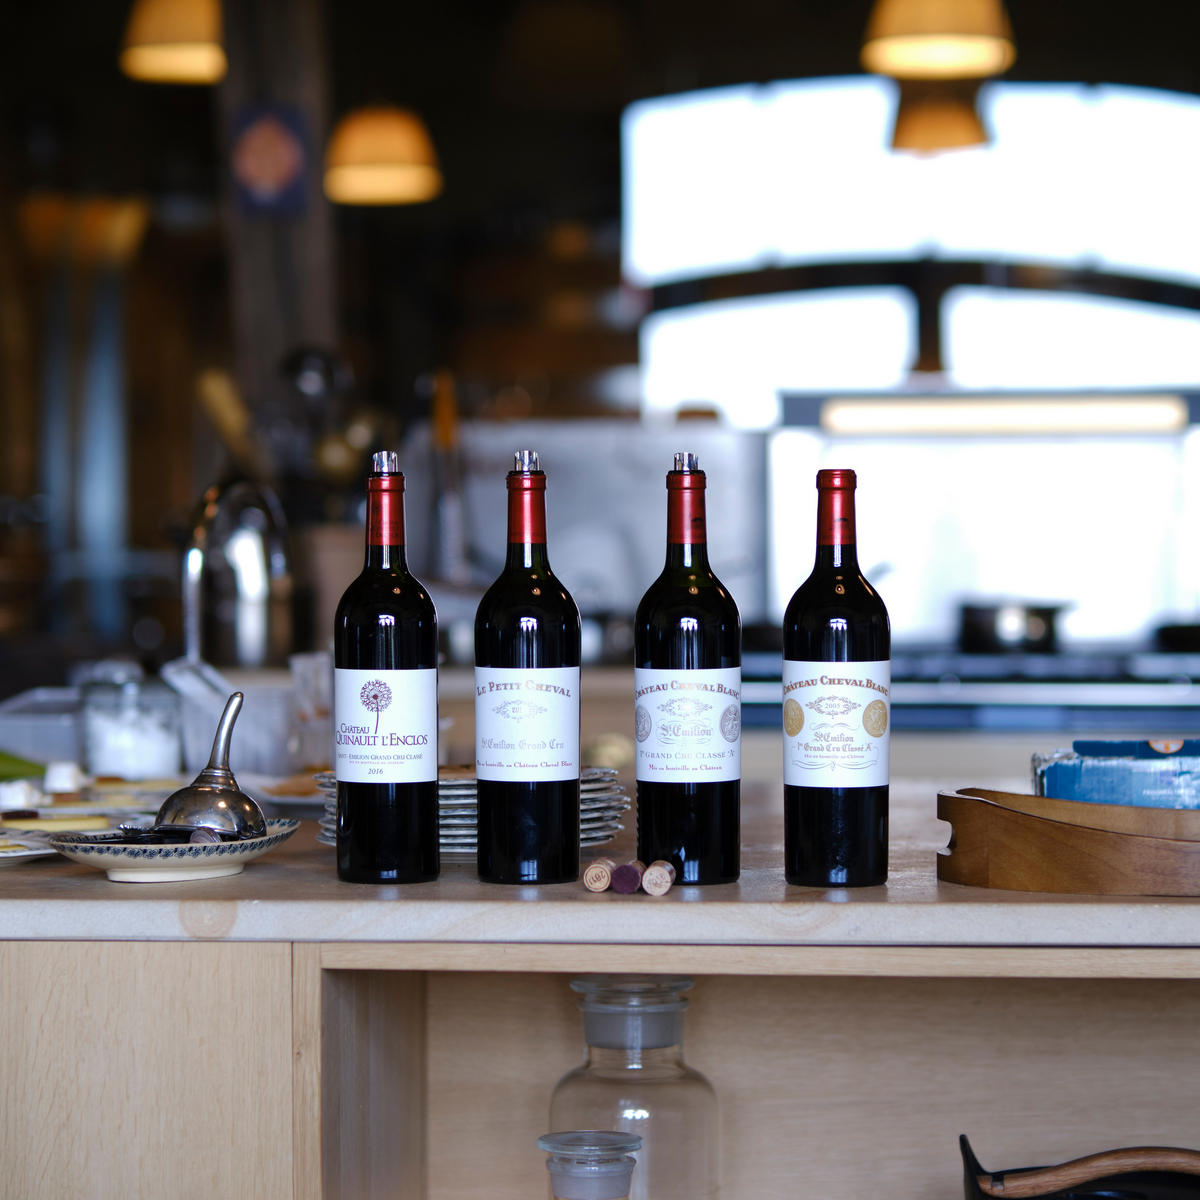 A line-up of wines from Cheval Blanc, including Le Petit Cheval and the grand vin.